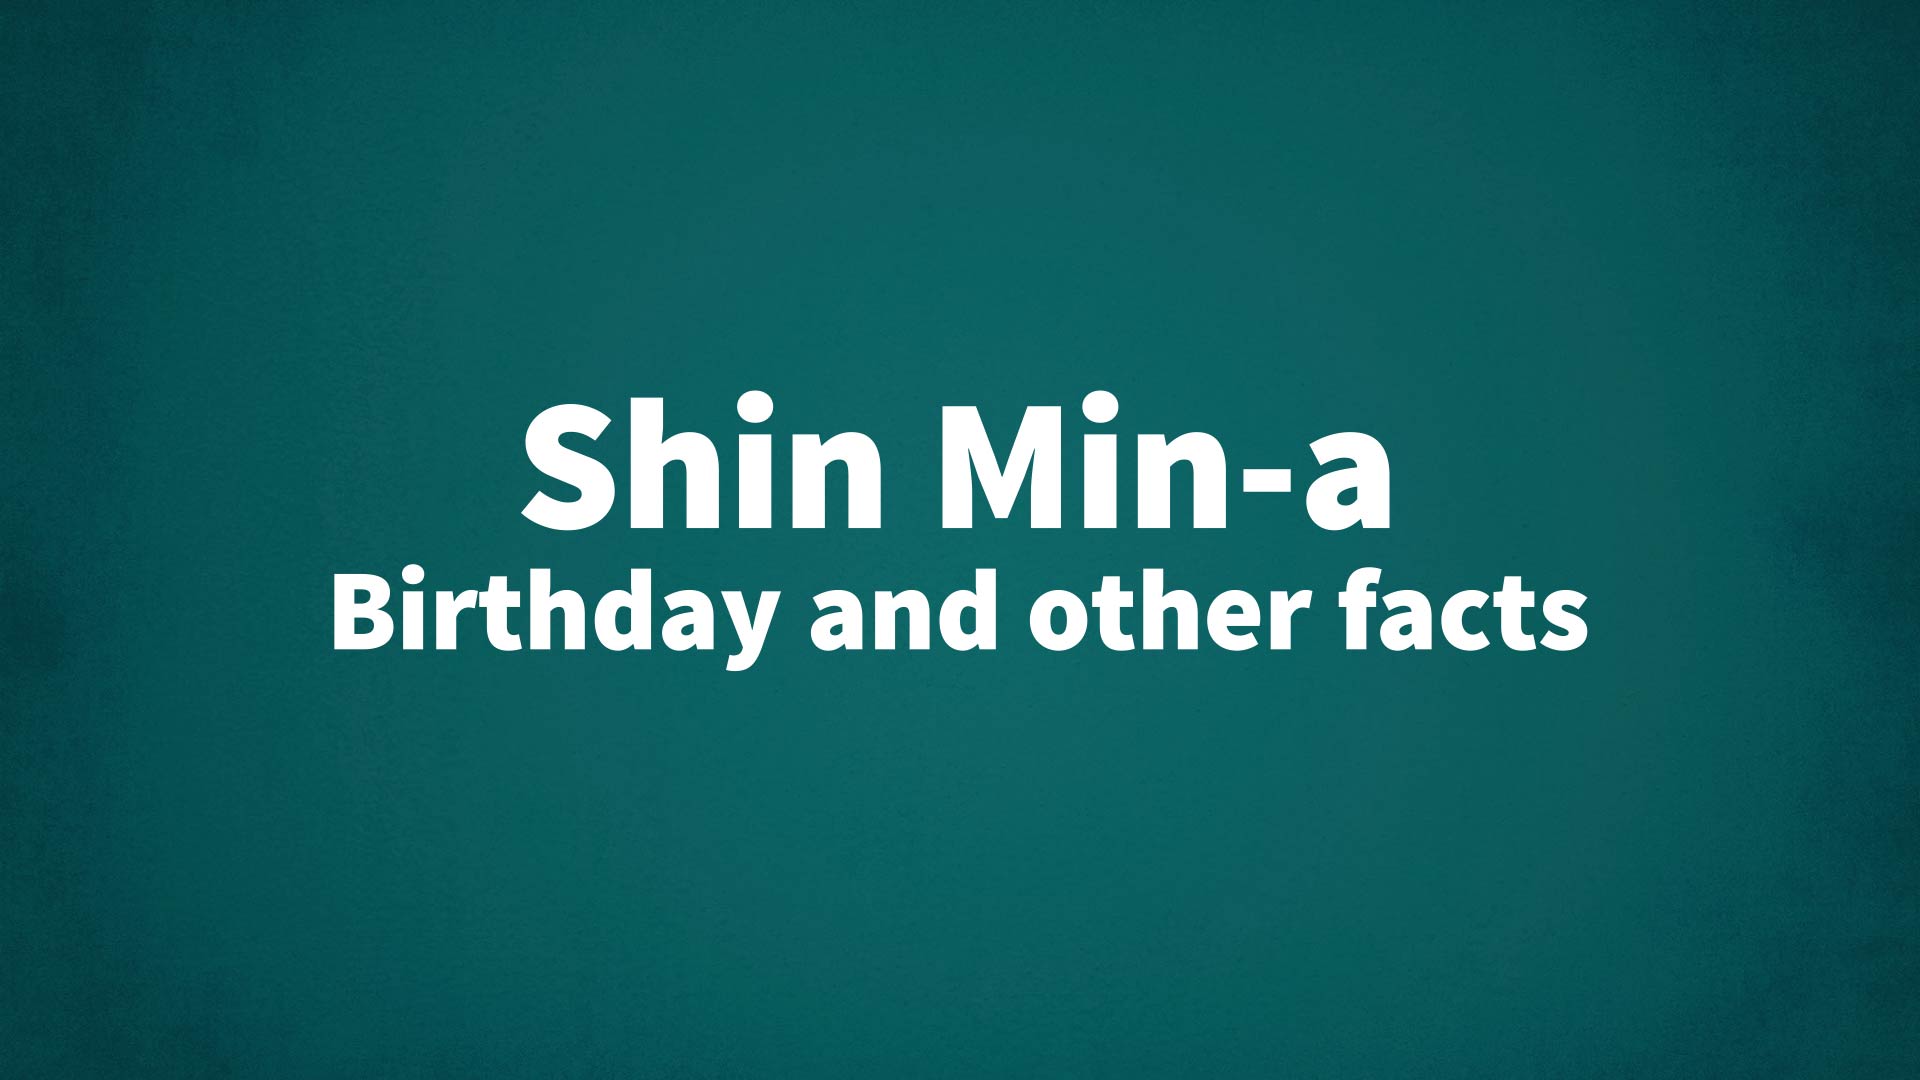 title image for Shin Min-a birthday